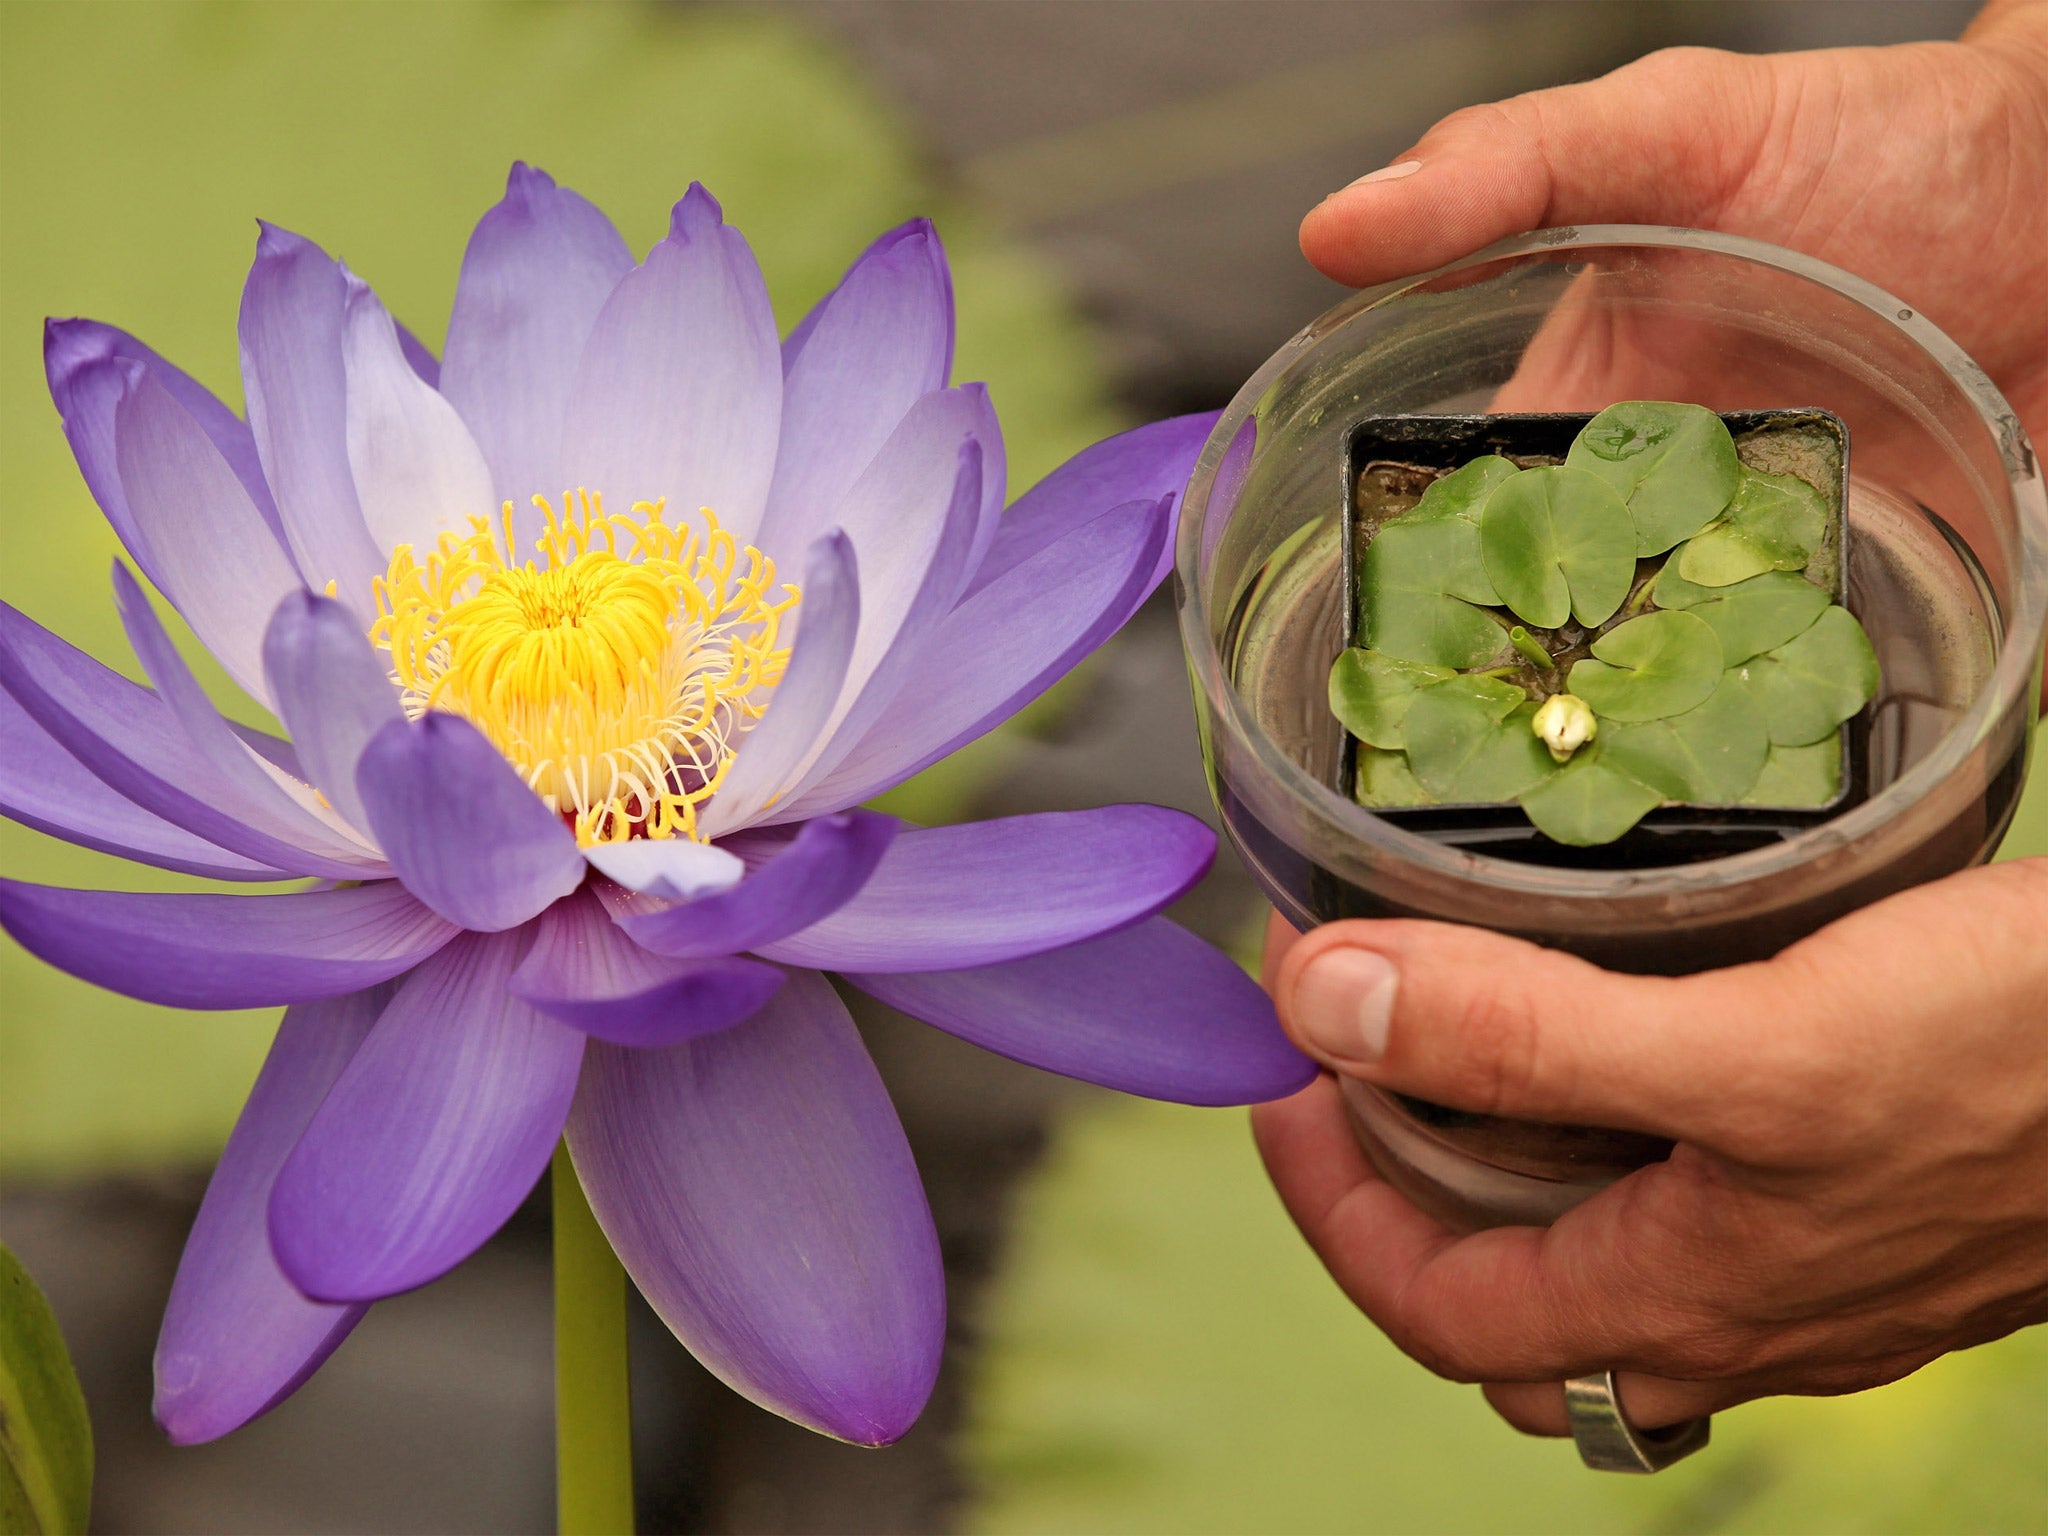 Growing profits: The tiny Nymphaea thermarum lily, which is extinct in the wild, was stolen from Kew Gardens last week and could be worth thousands of pounds on the black market